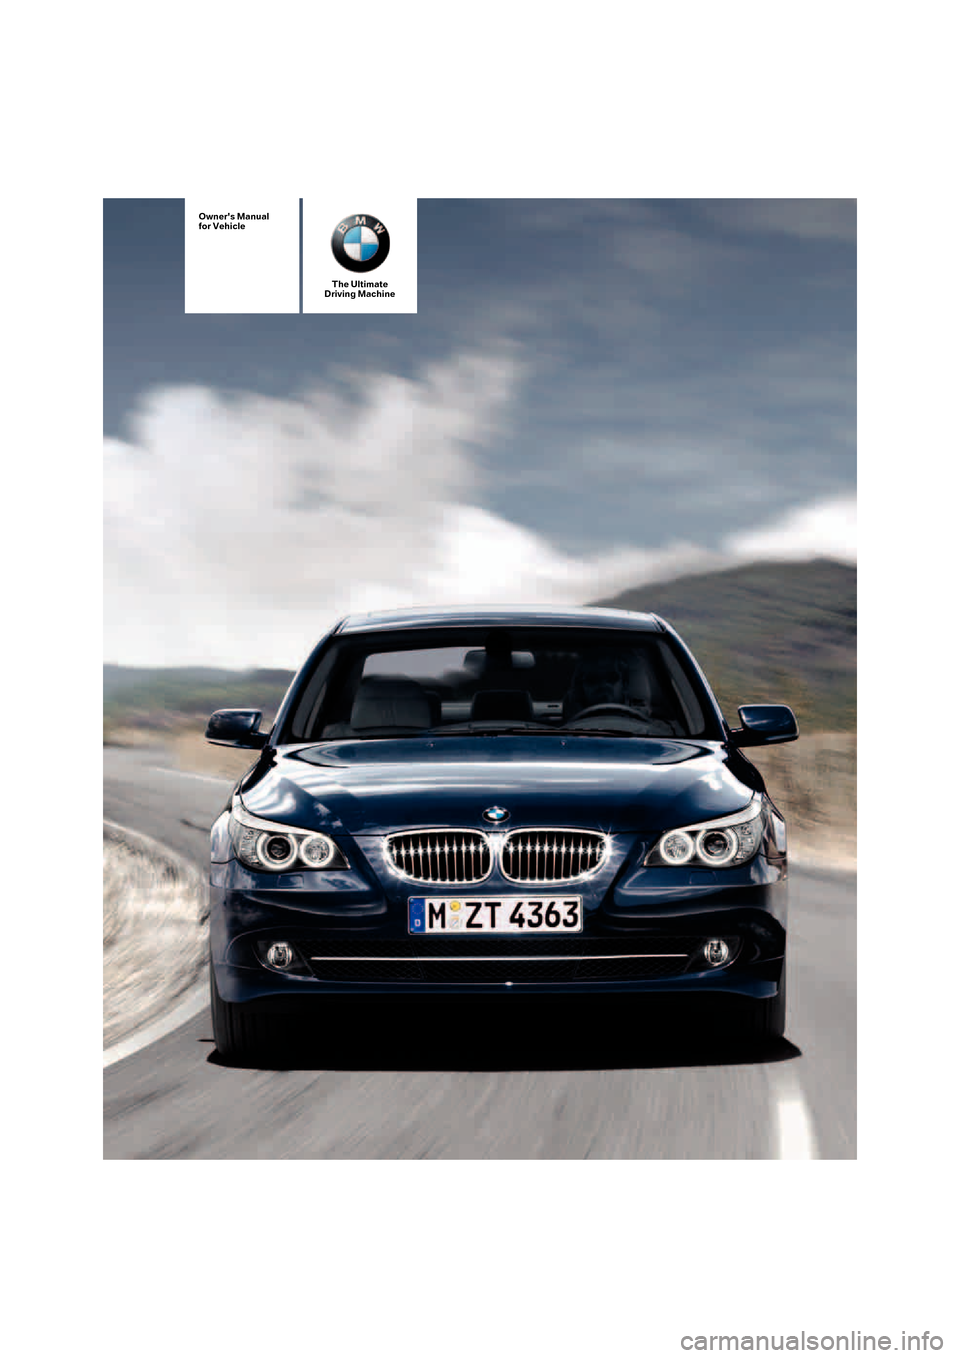 BMW 550I SEDAN 2007 E60 Owners Manual The Ultimate
Driving Machine
Owners Manual
for Vehicle 